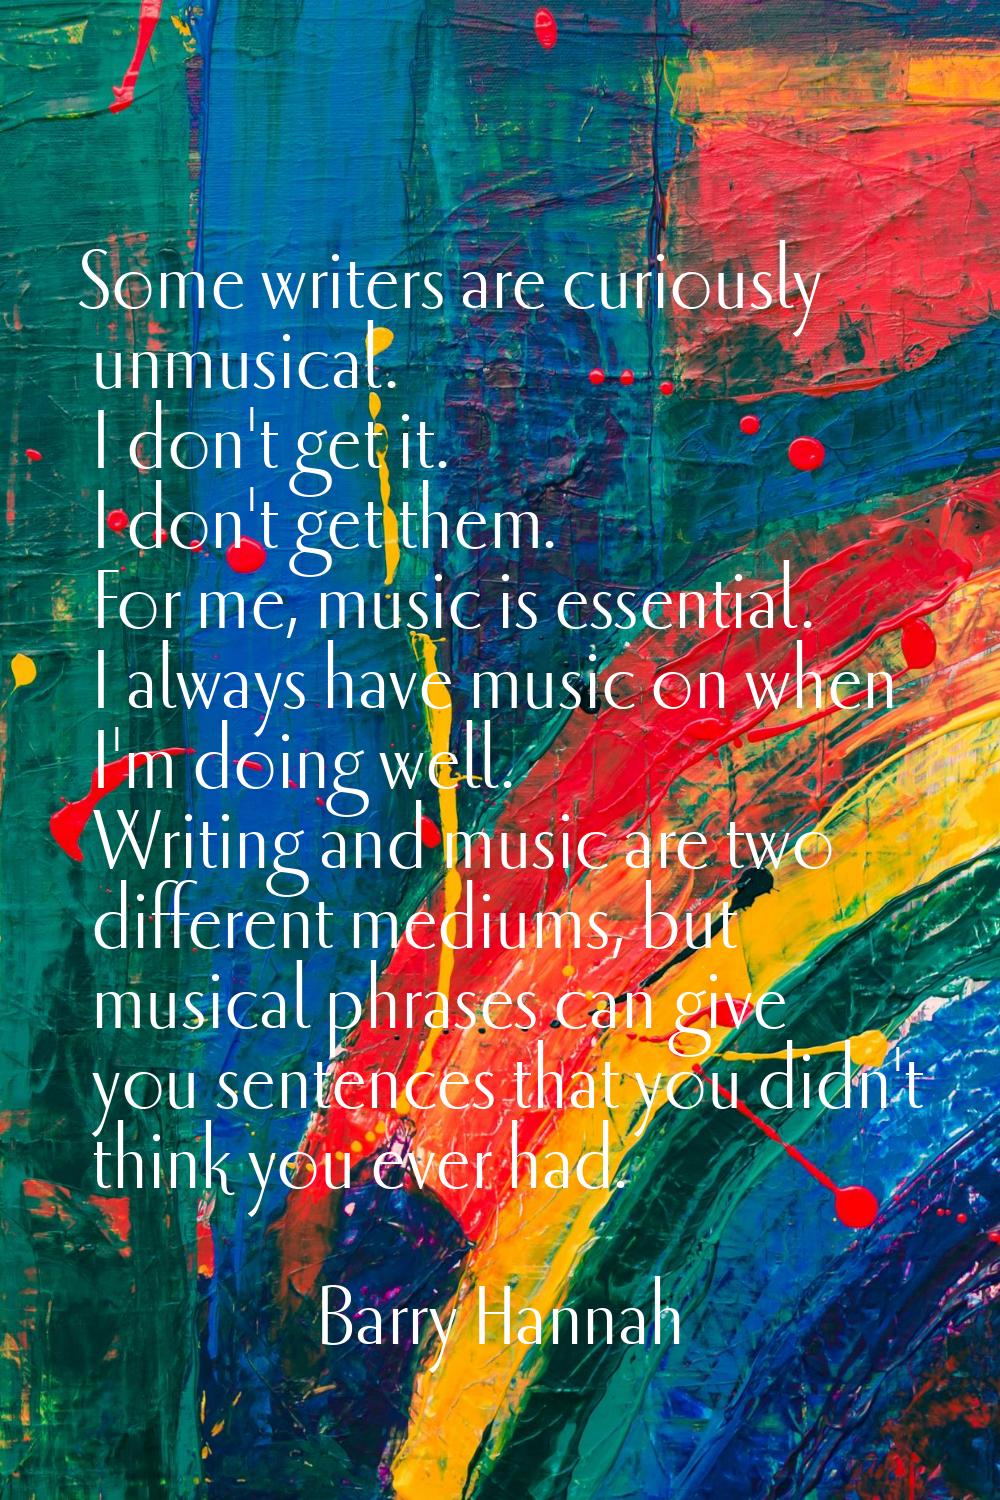 Some writers are curiously unmusical. I don't get it. I don't get them. For me, music is essential.